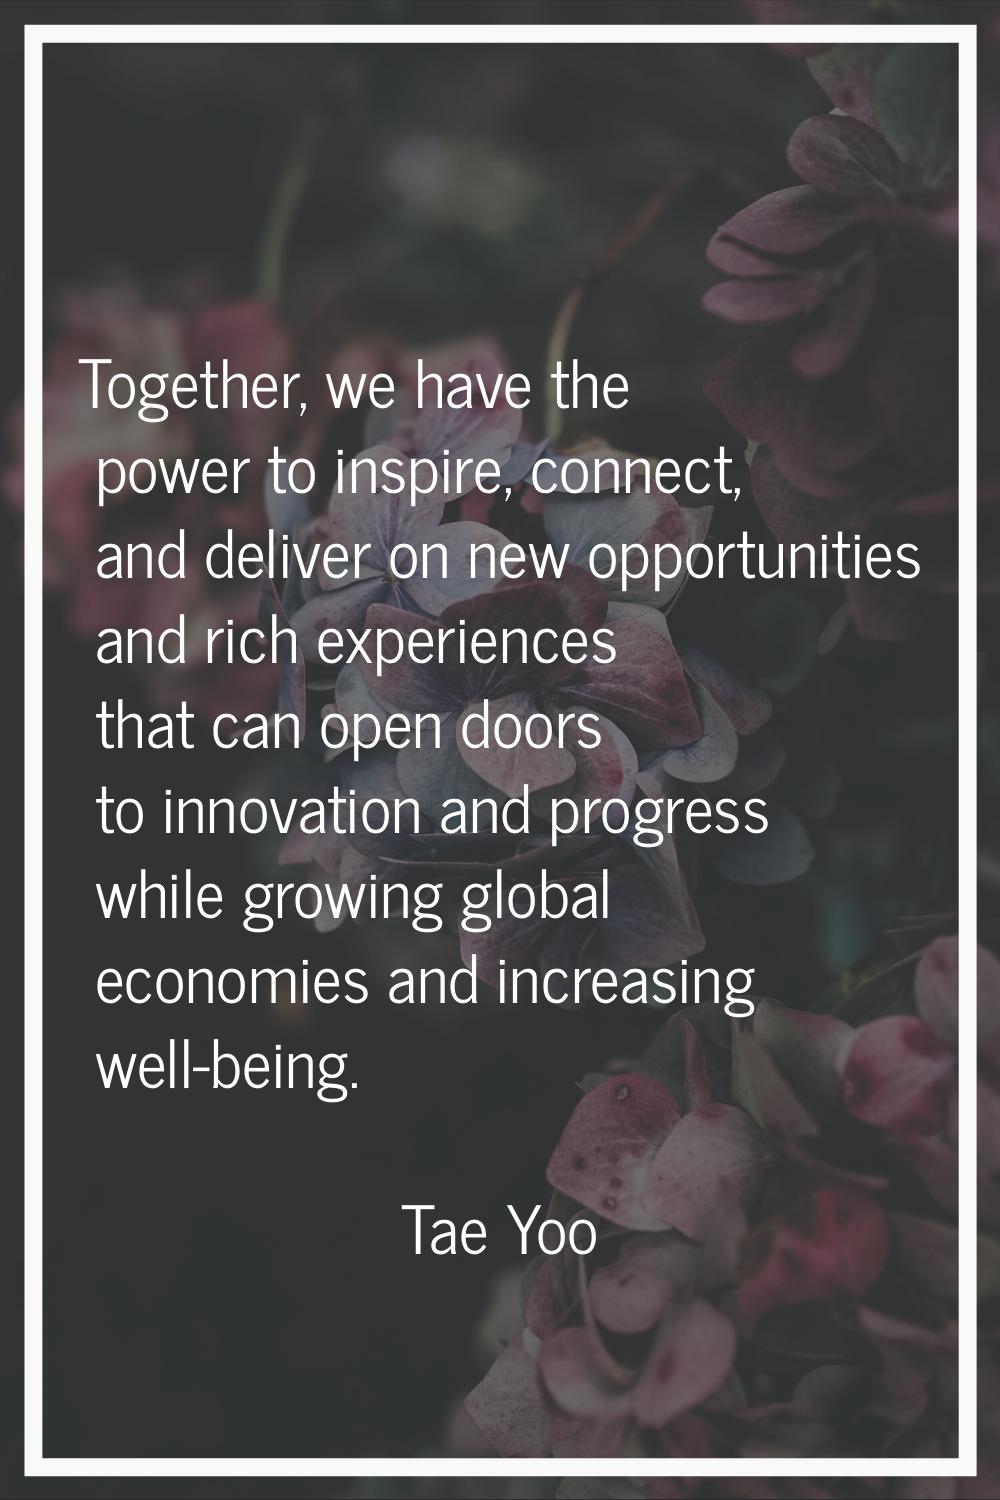 Together, we have the power to inspire, connect, and deliver on new opportunities and rich experien